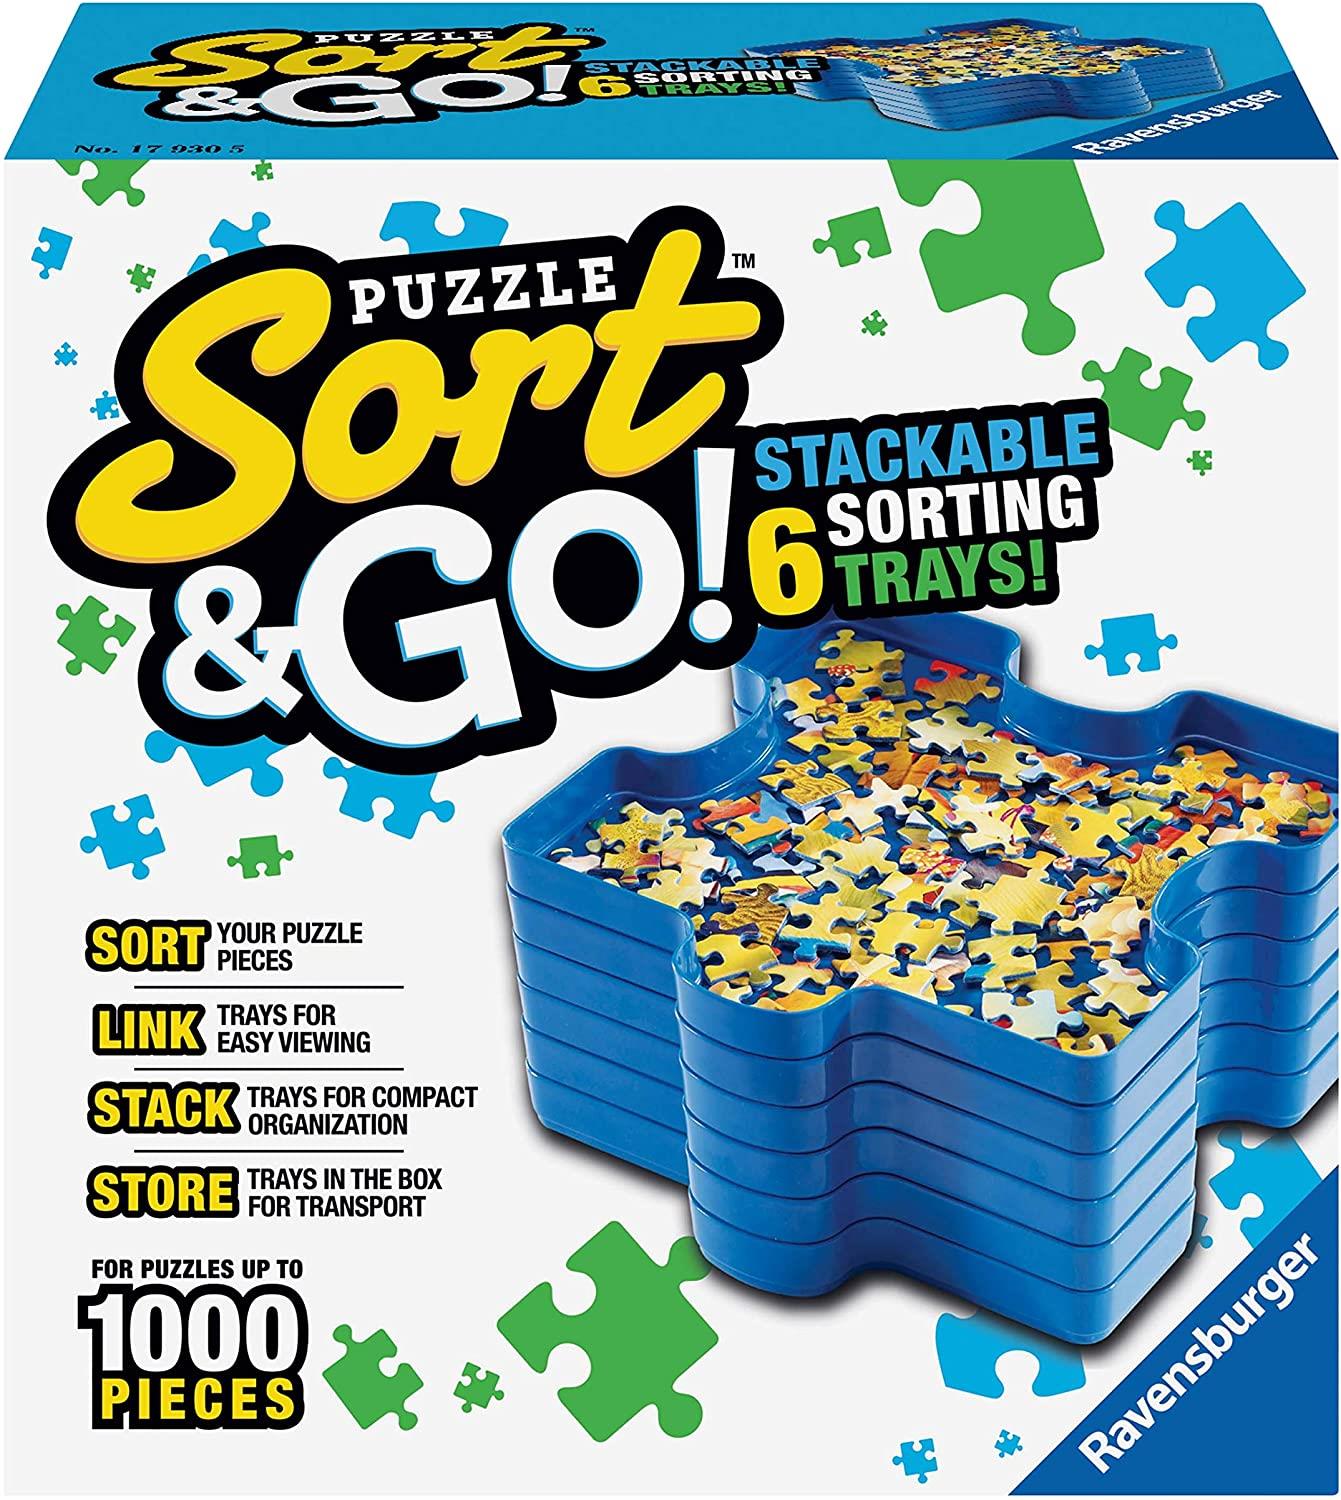 Ravensburger Sort & Go! Stackable Puzzle Sorting Trays – PDK